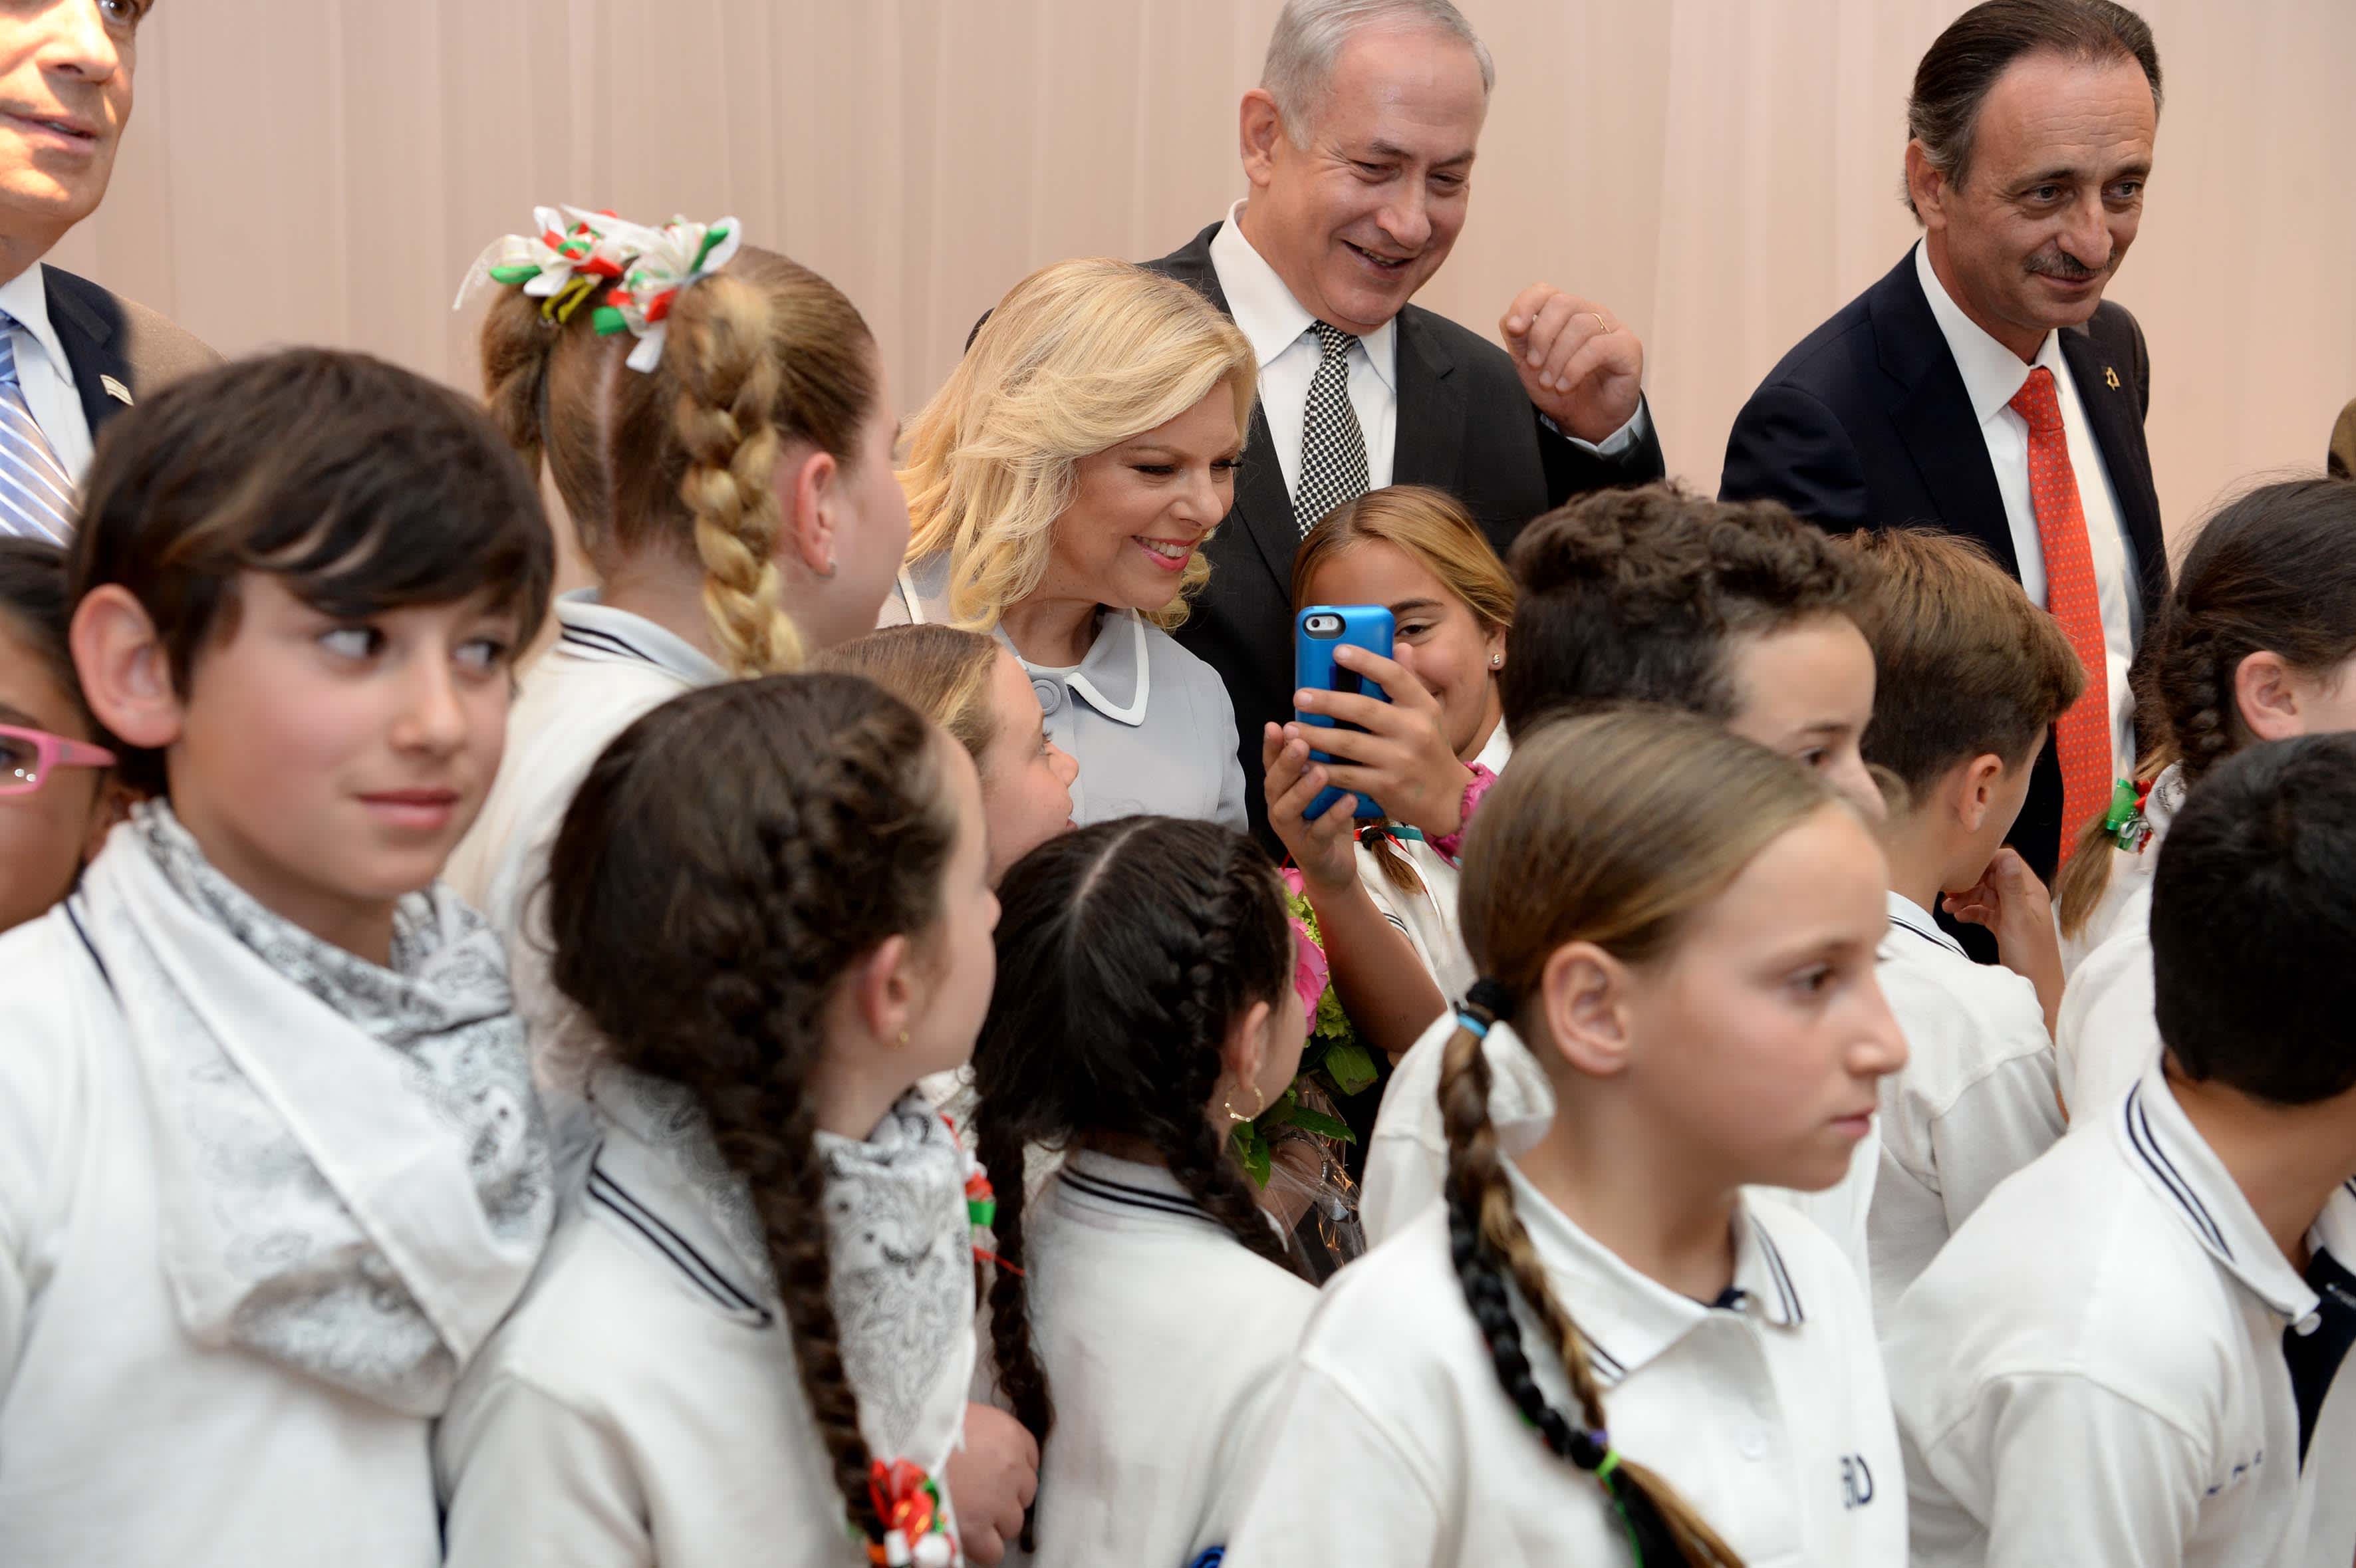 Prime Minister Benjamin Netanyahuand wfie Sara at an event for the Jewish community in Mexico City, September 14, 2017